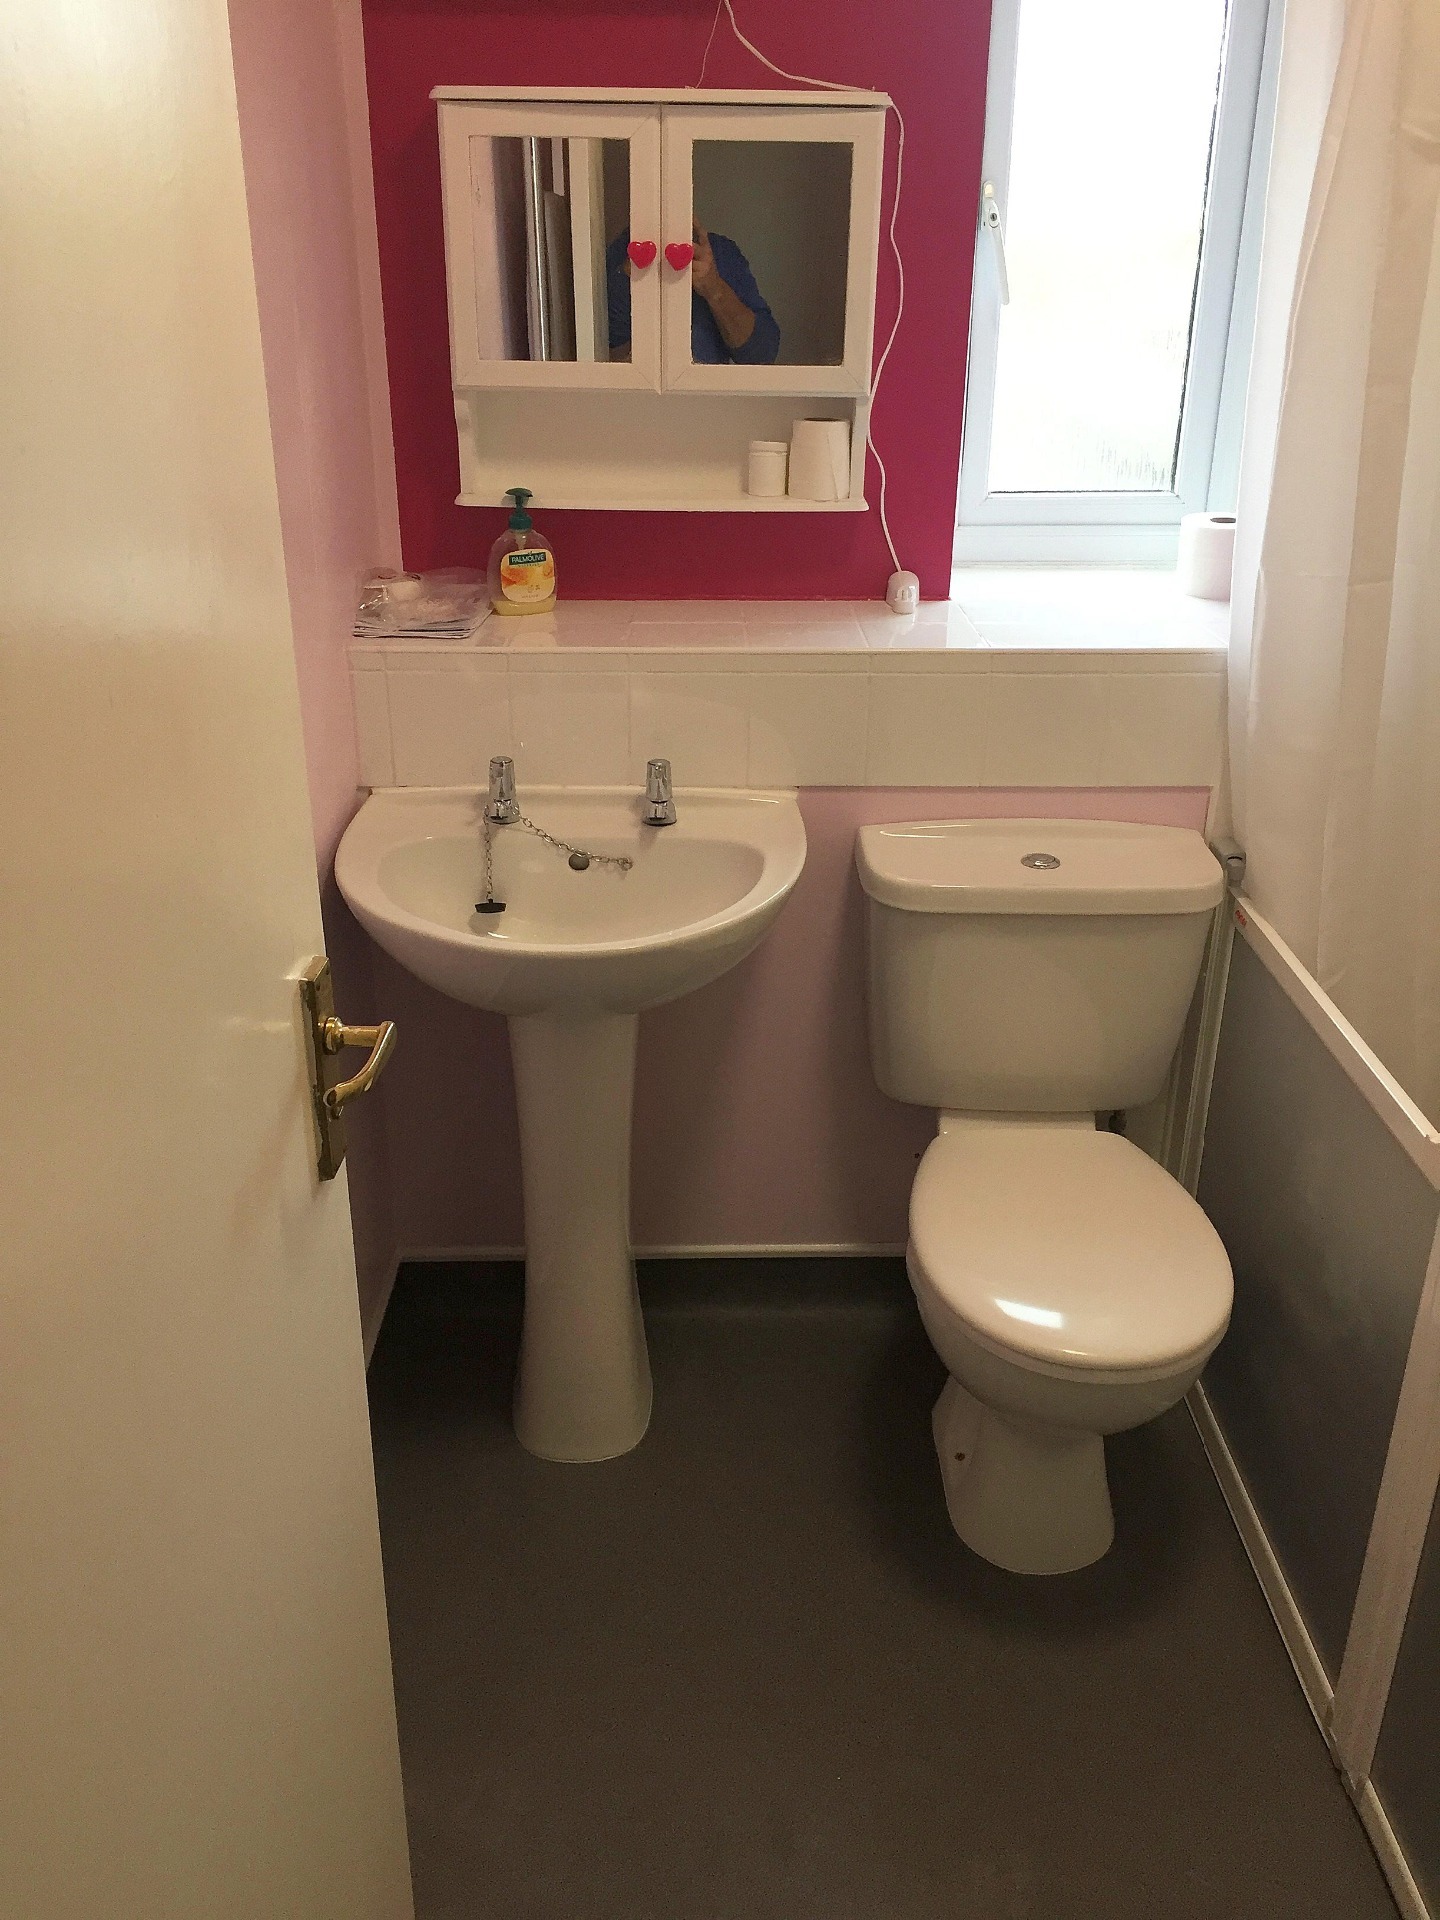 Toilet and sink suite to fit with splash back wall covering. 